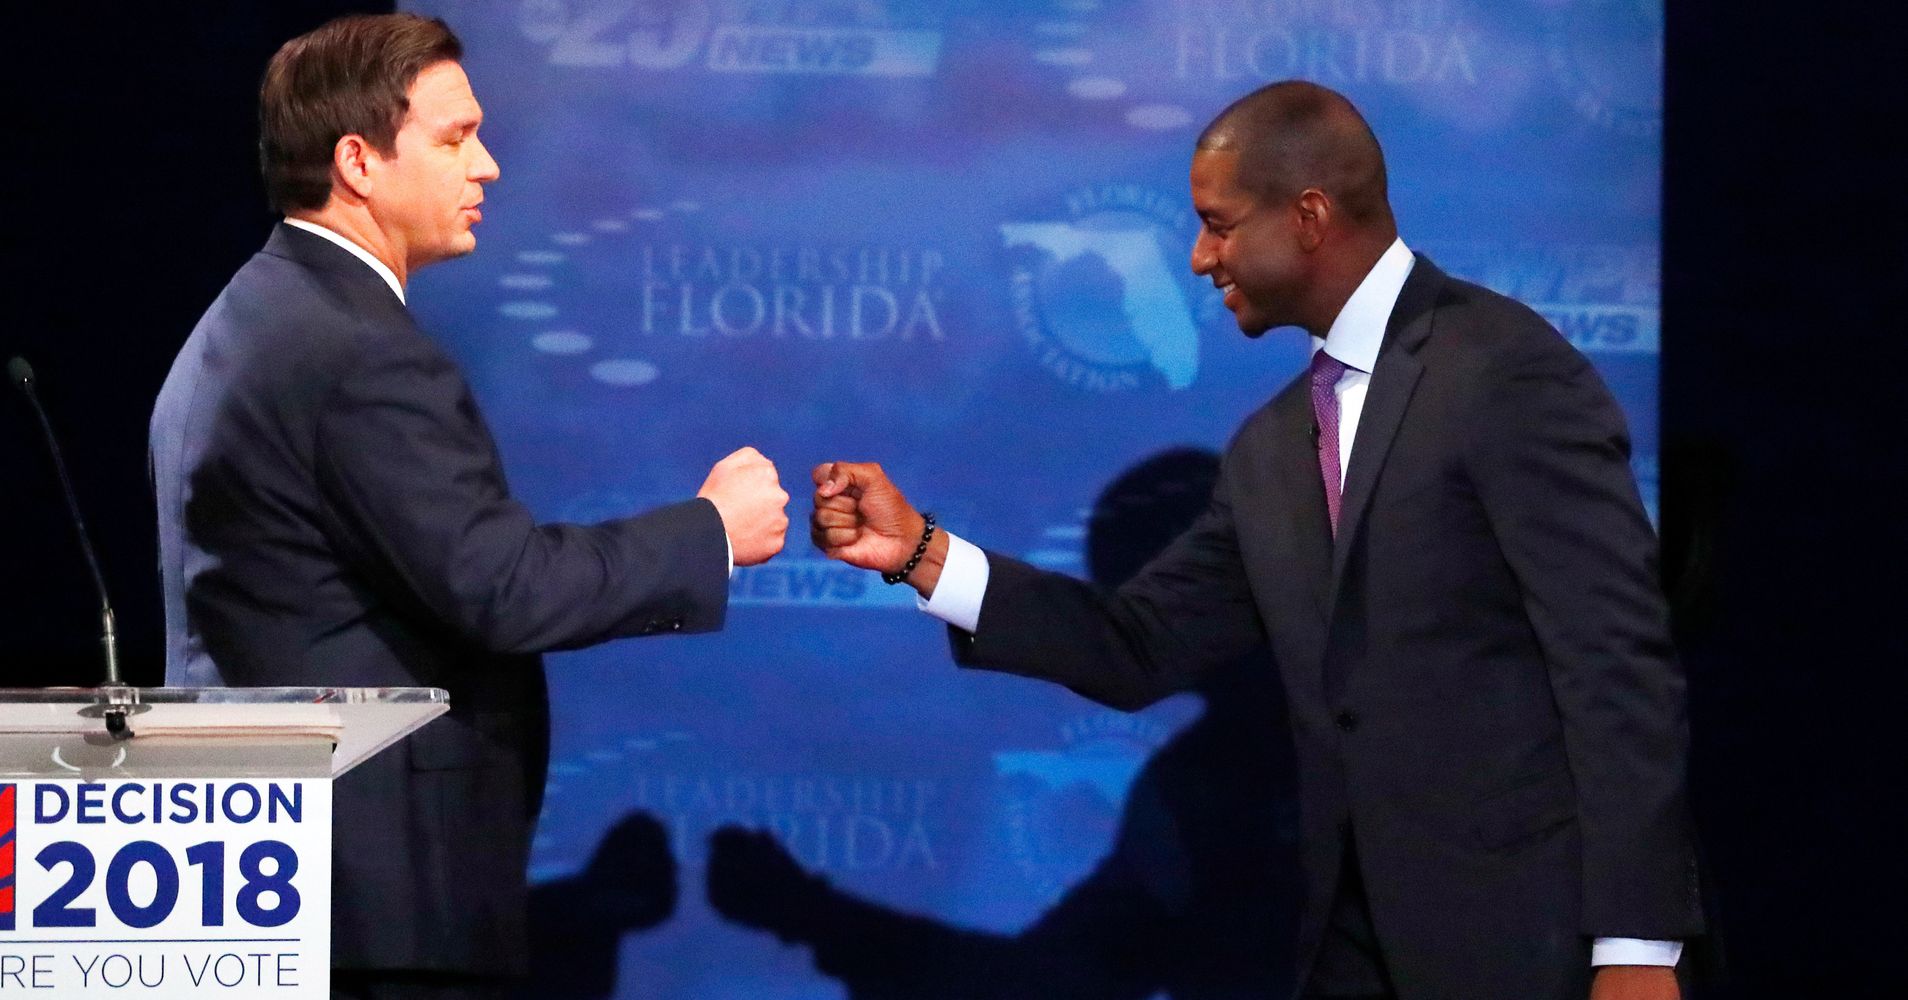 MSNBC Airs Results Of Florida Governor Election In Test 'Misfire